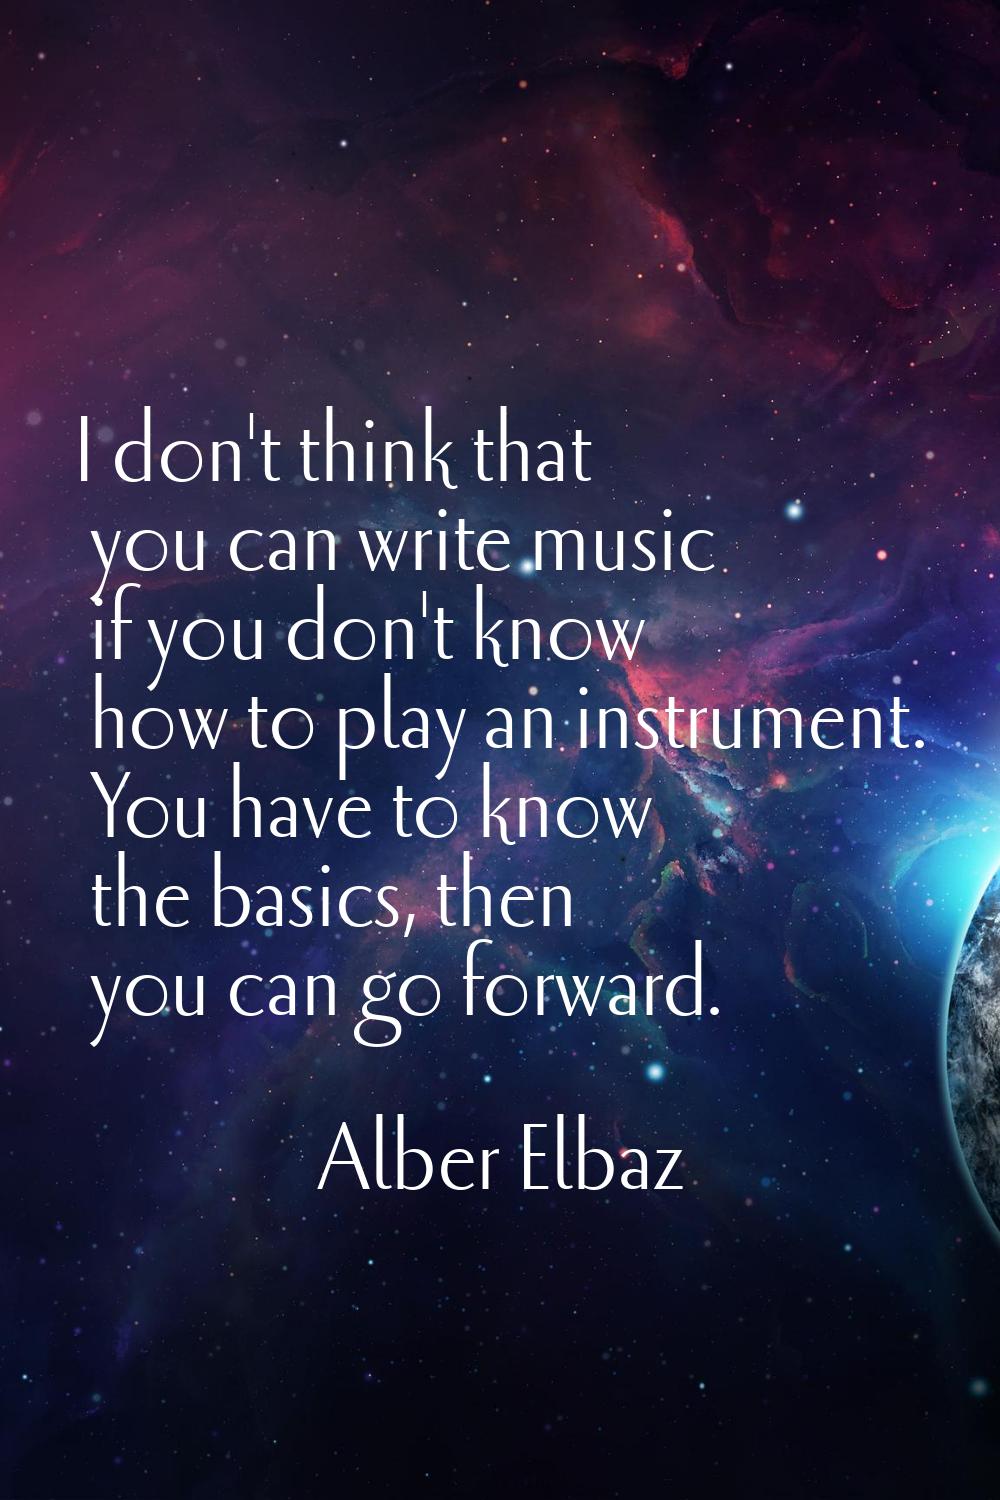 I don't think that you can write music if you don't know how to play an instrument. You have to kno